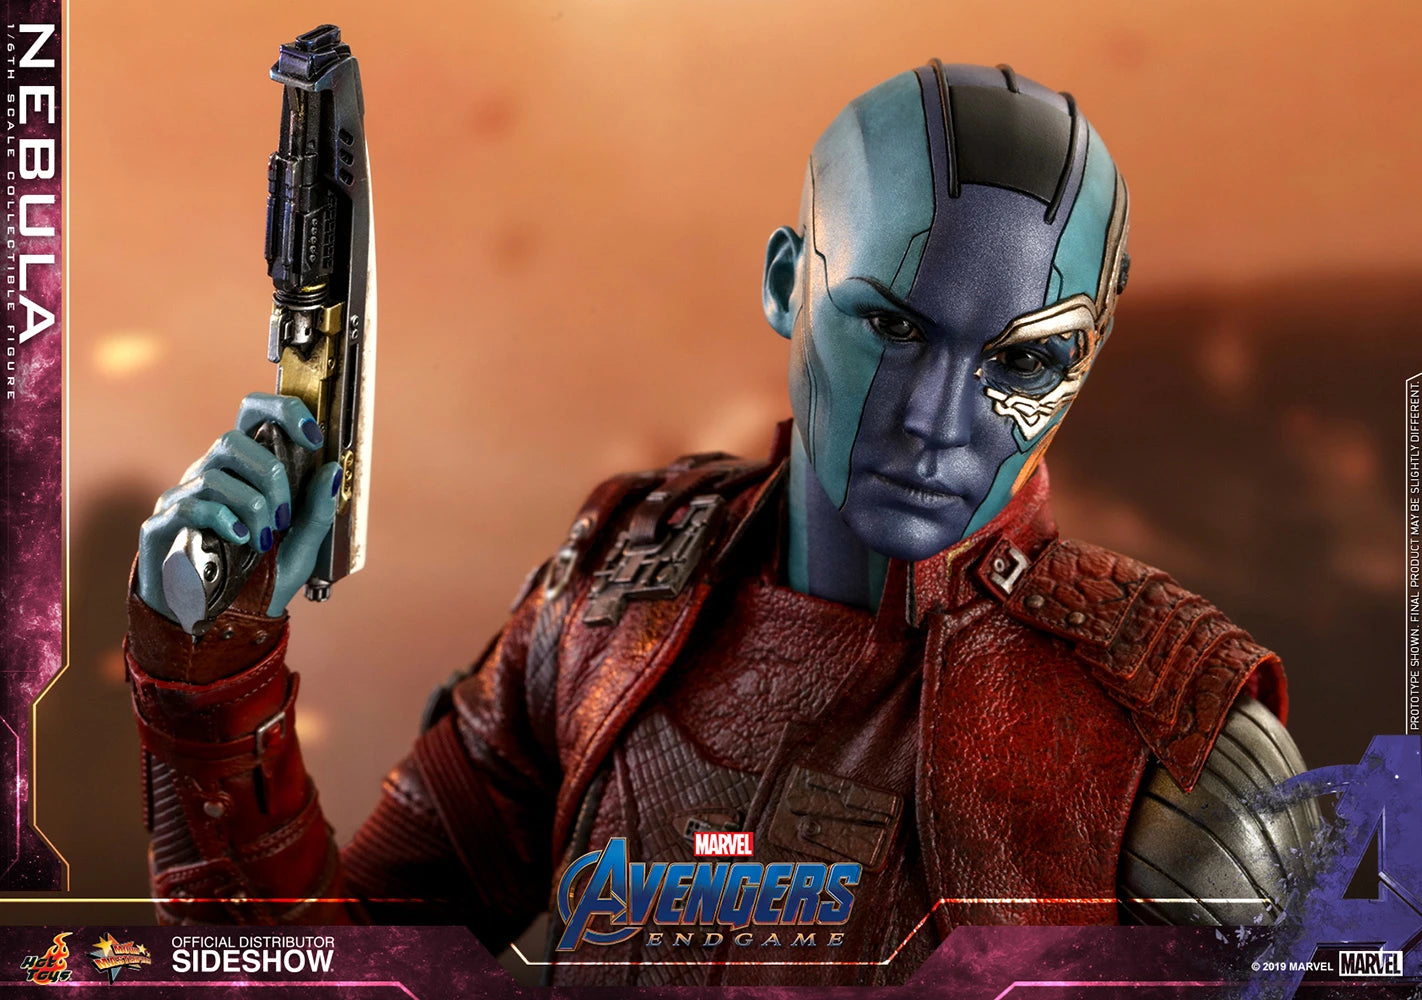 HOT TOYS MARVEL AVENGERS ENDGAME NEBULA 1/6TH SCALE COLLECTIBLE FIGURE - MMS534 - Anotoys Collectibles